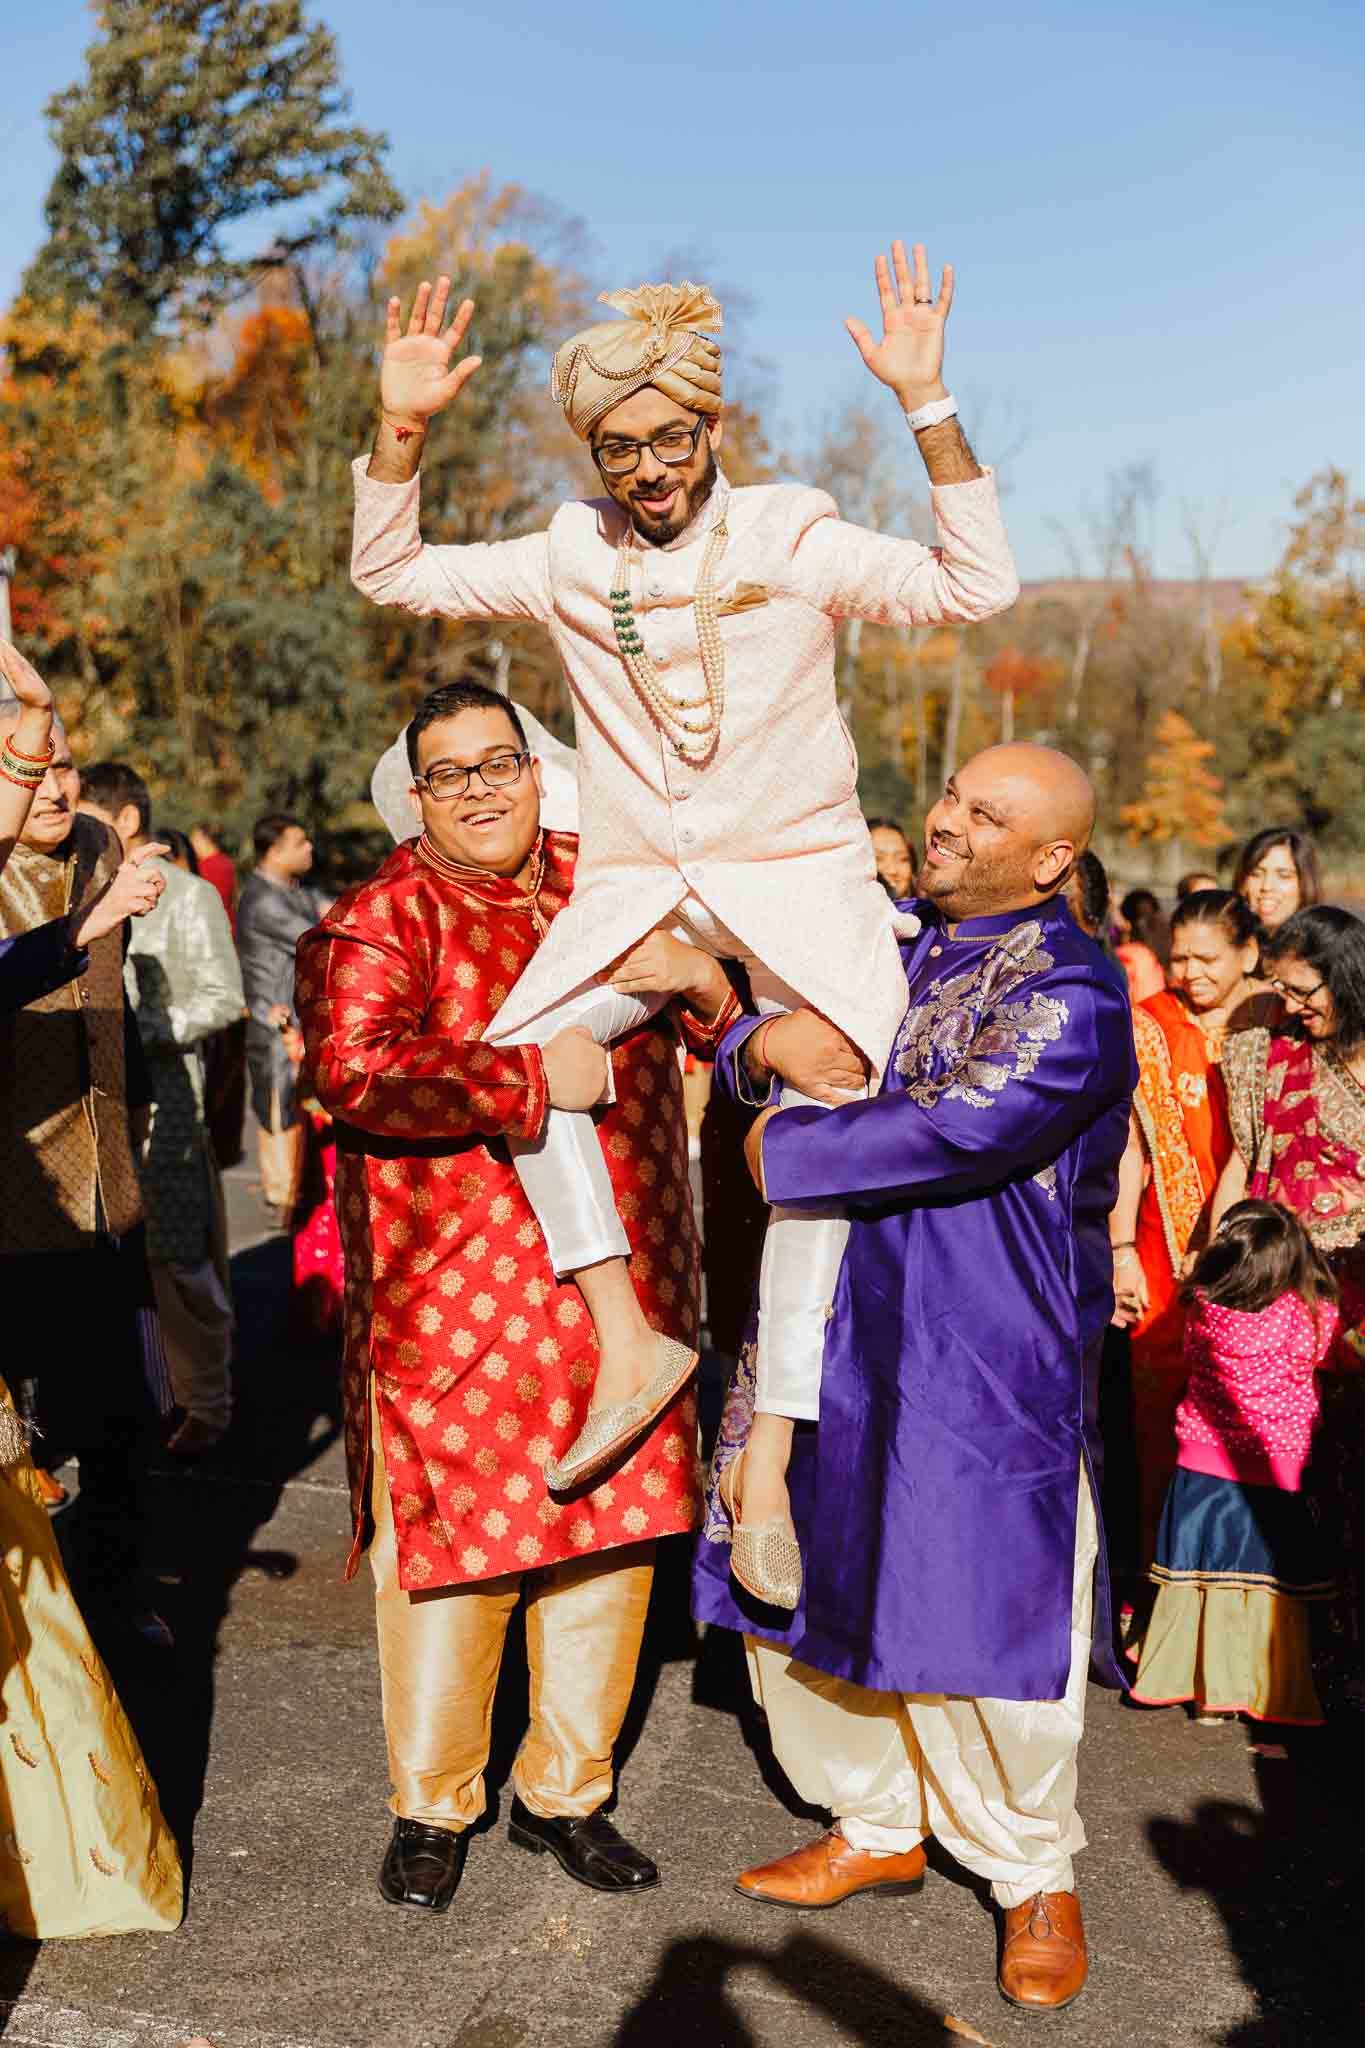 Indian groom lifted in air by his friends